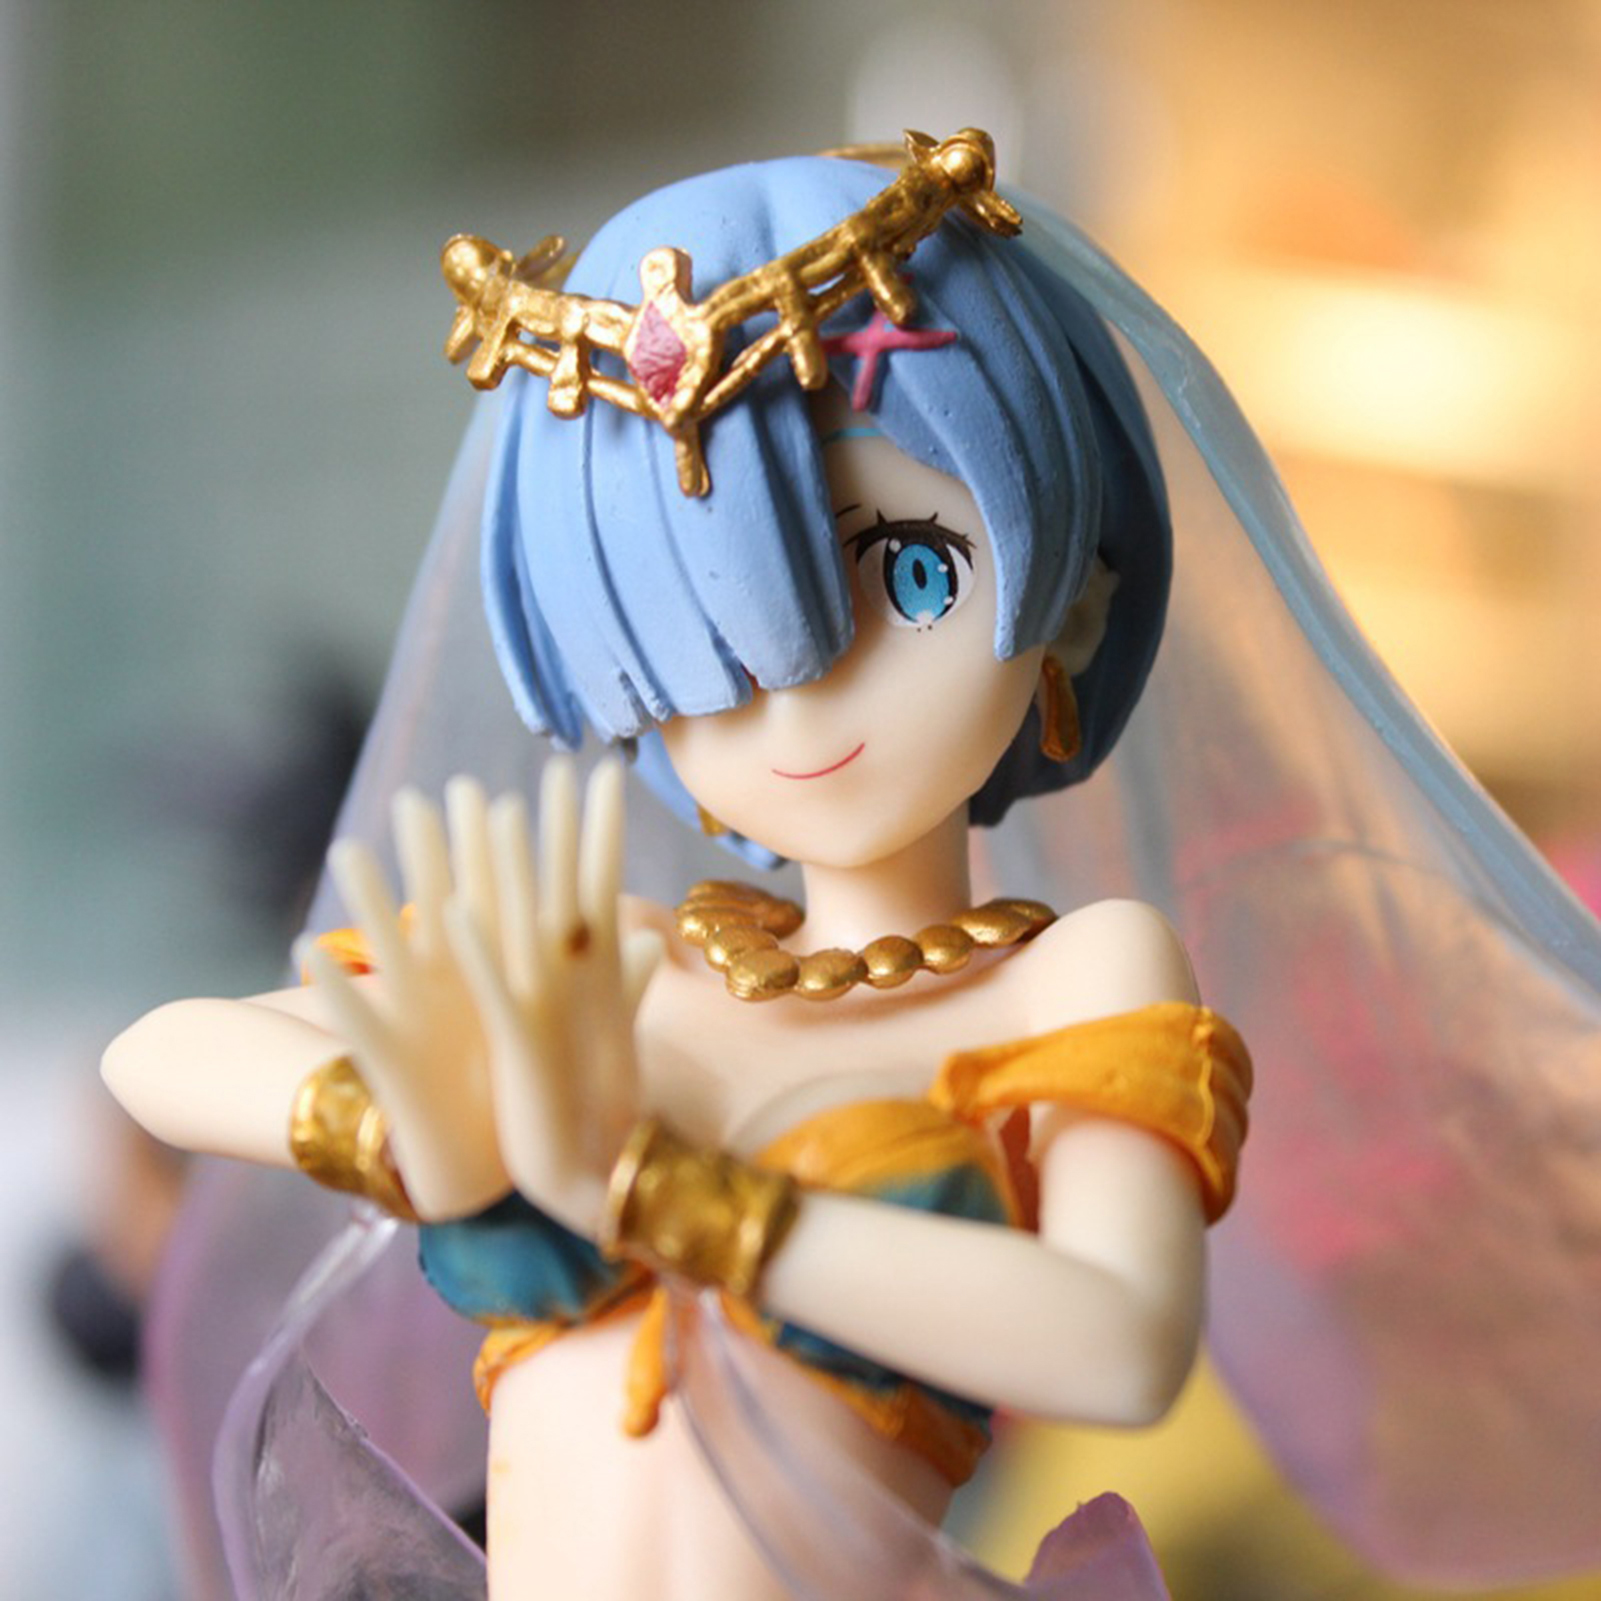 20 Best Anime Figurines For An Ultimate Collection